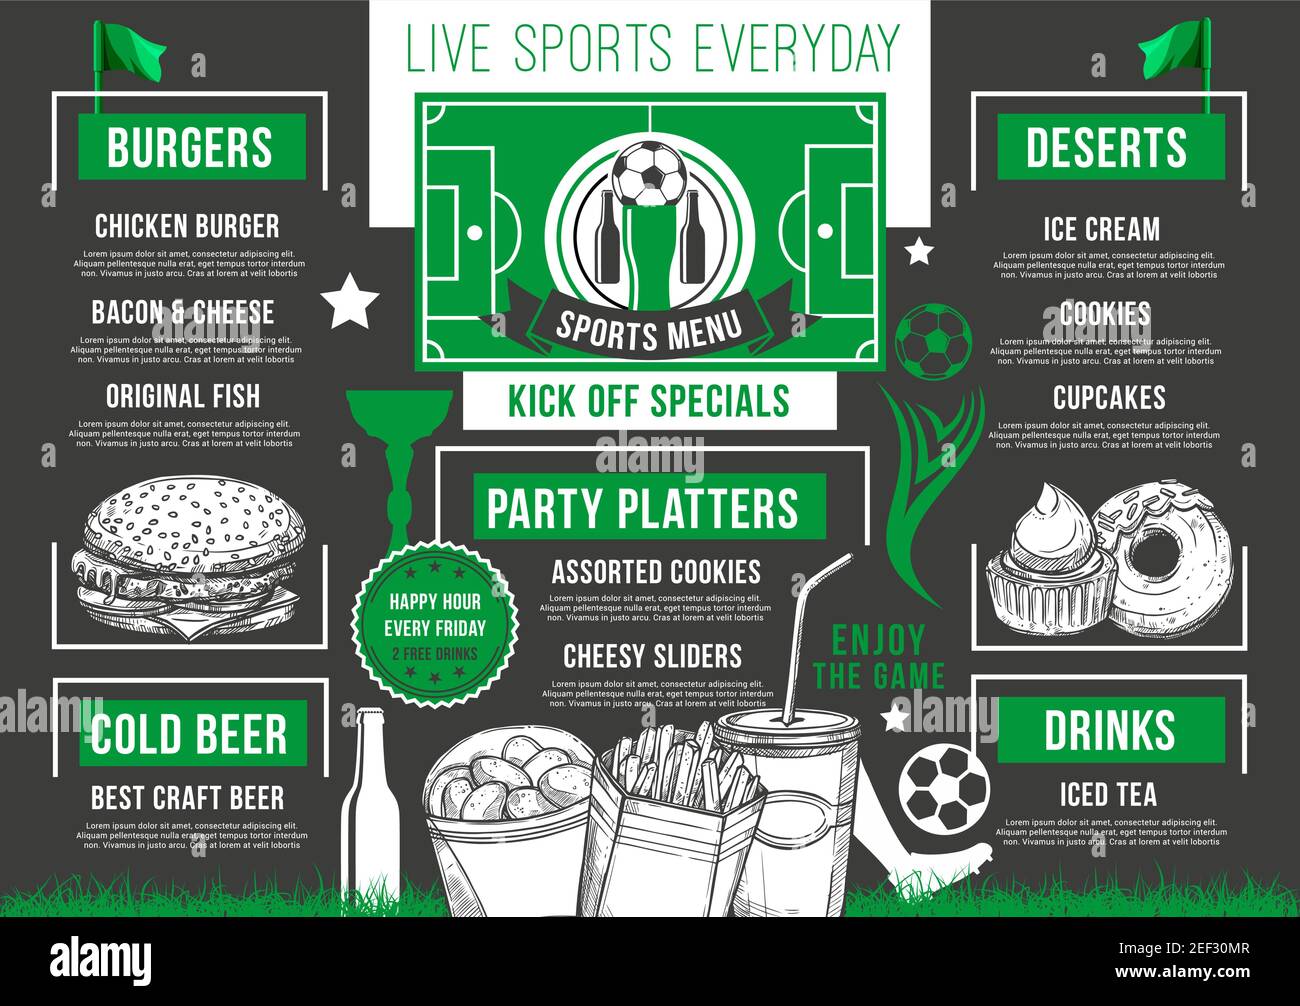 Soccer sports pub or bar menu design template for meal snacks and hamburgers. Vector live games championship beer pub menu for beer drinks of football Stock Vector